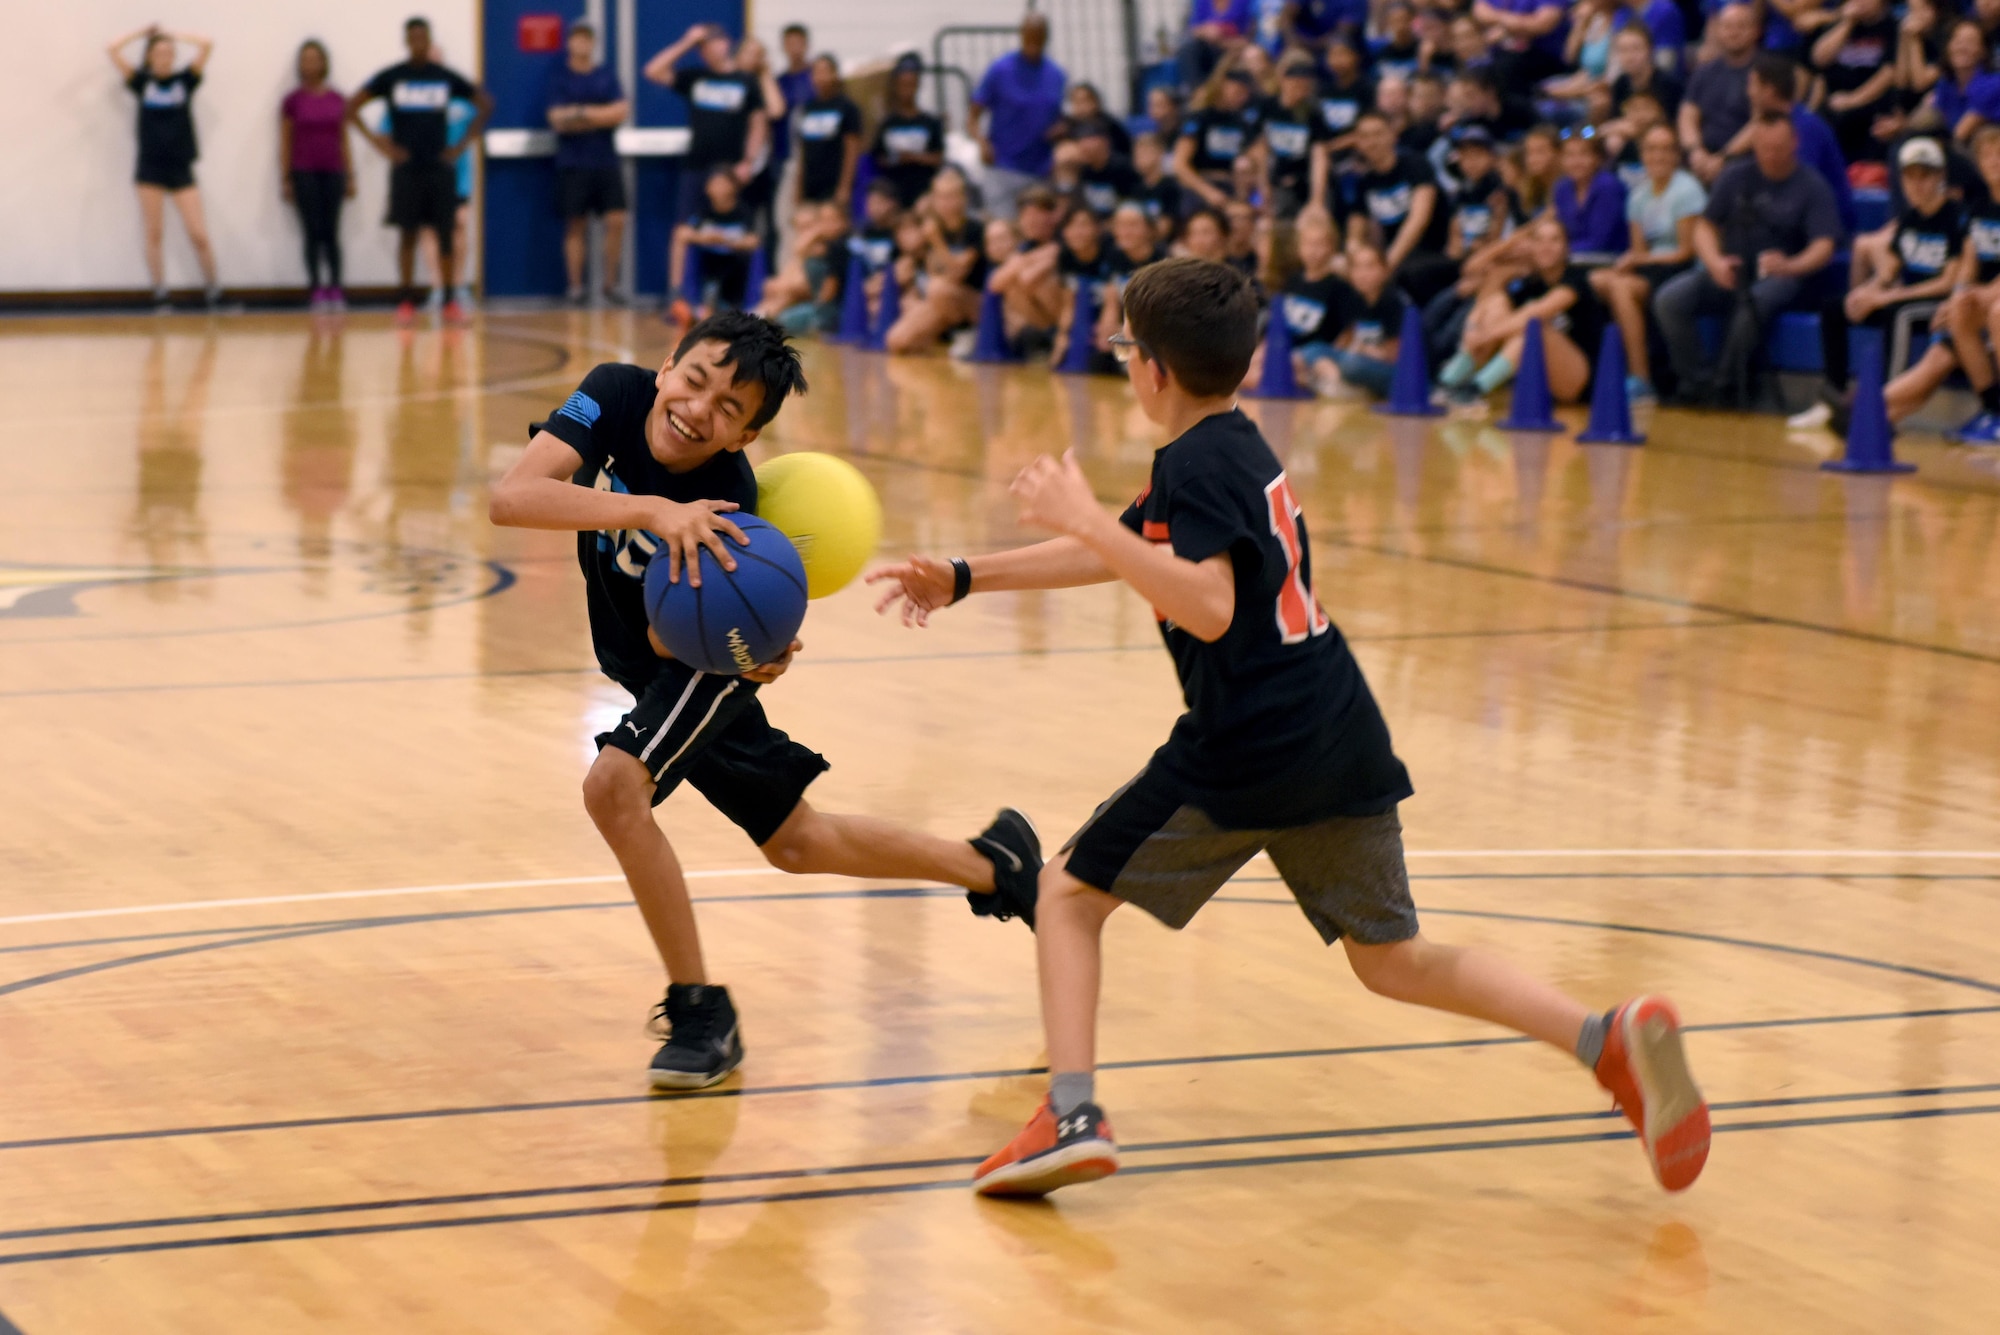 A red team student tags out a blue team student in a game of basket-dodgeball during ‘The RACE’ at Royal Air Force Lakenheath, England, Aug. 14, 2017. Students participating in ‘The RACE’ are encouraged to bring friends and classmates to join. (U.S. Air Force photo by Airman 1st Class John A. Crawford)